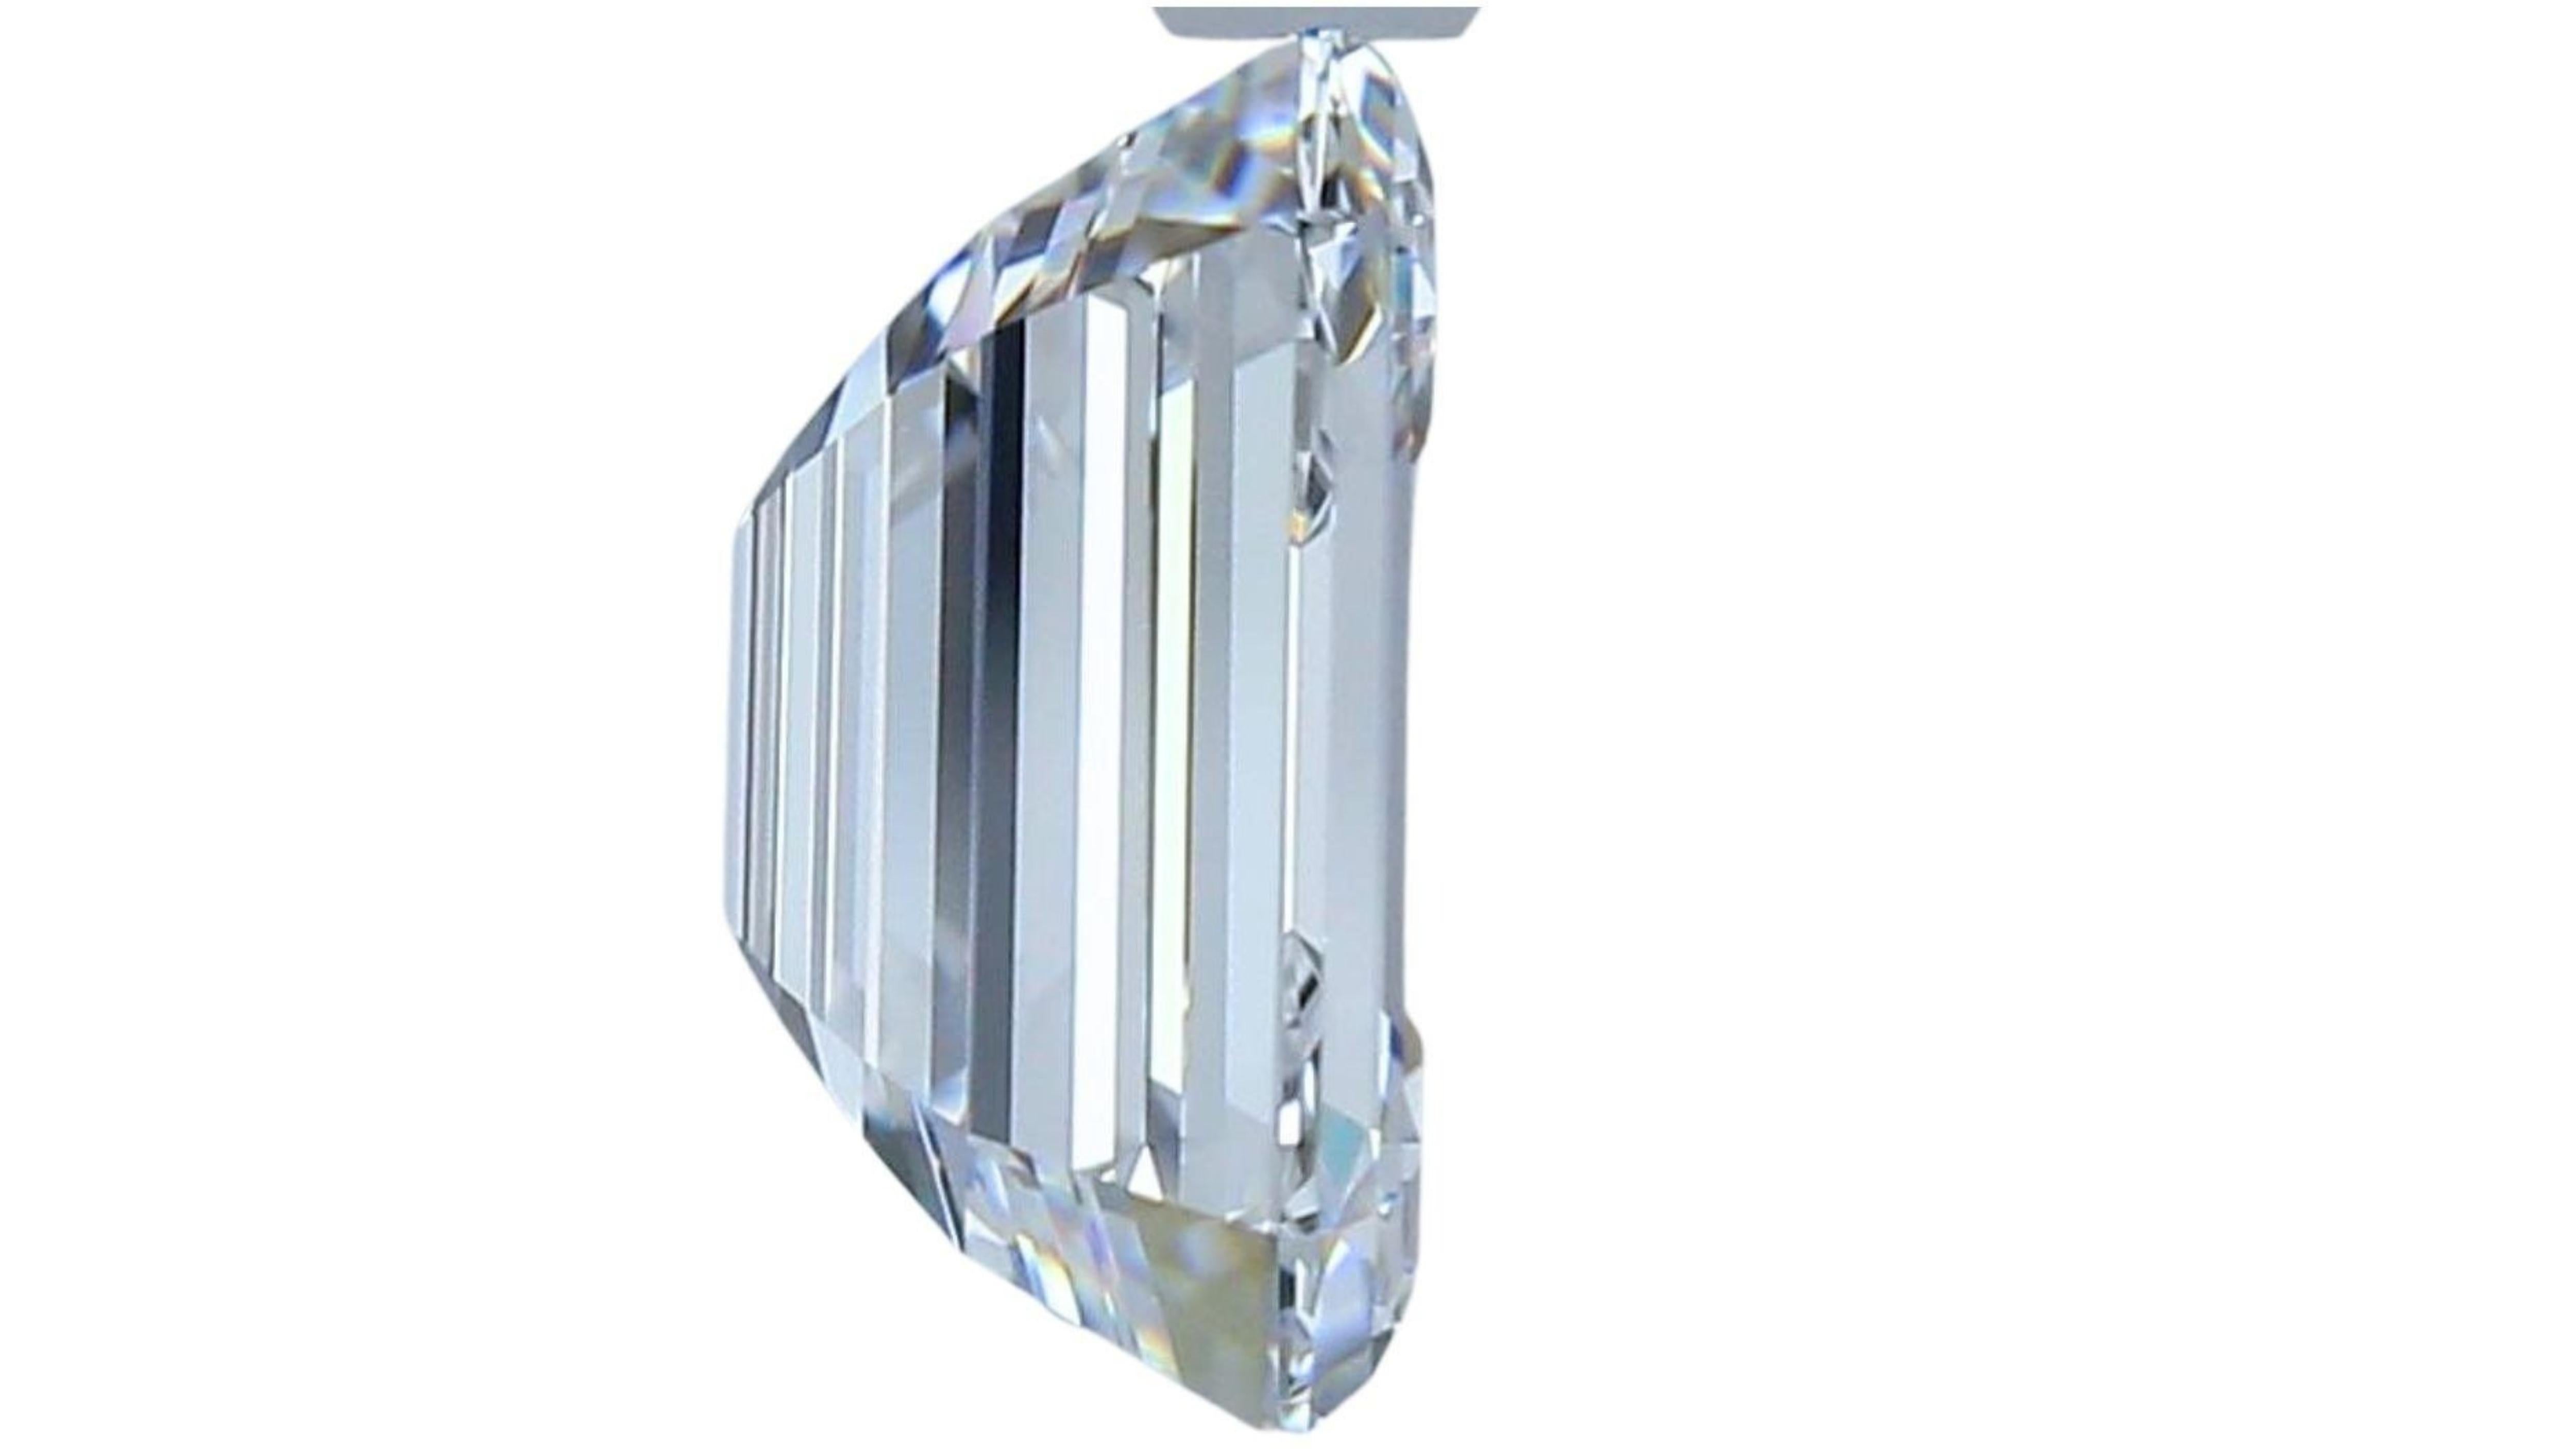 1 pc. Shimmering 4.01 Carat Emerald Cut Natural Diamond For Sale 1